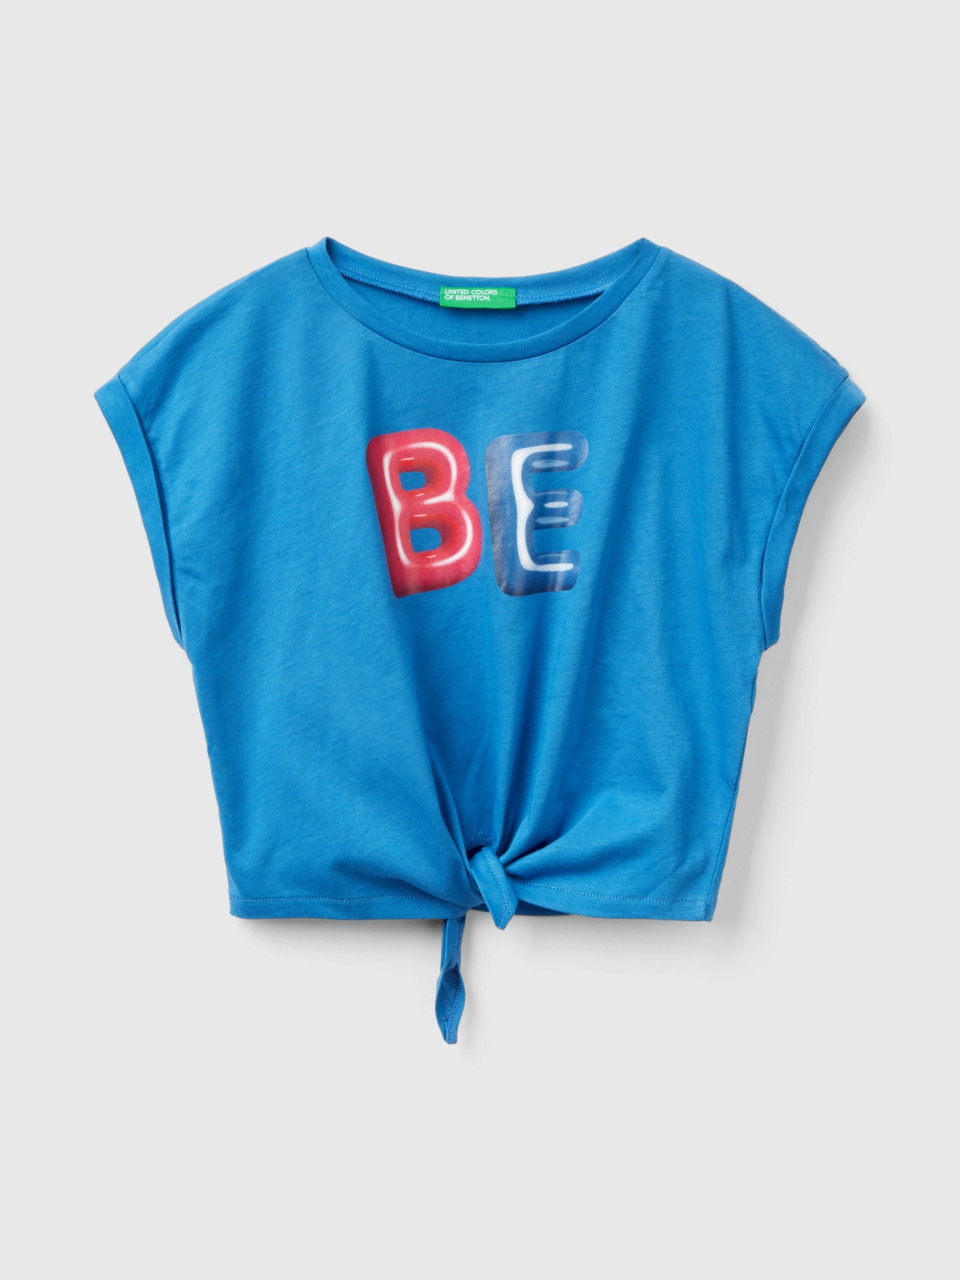 Benetton, T-shirt With Print And Knot, Blue, Kids